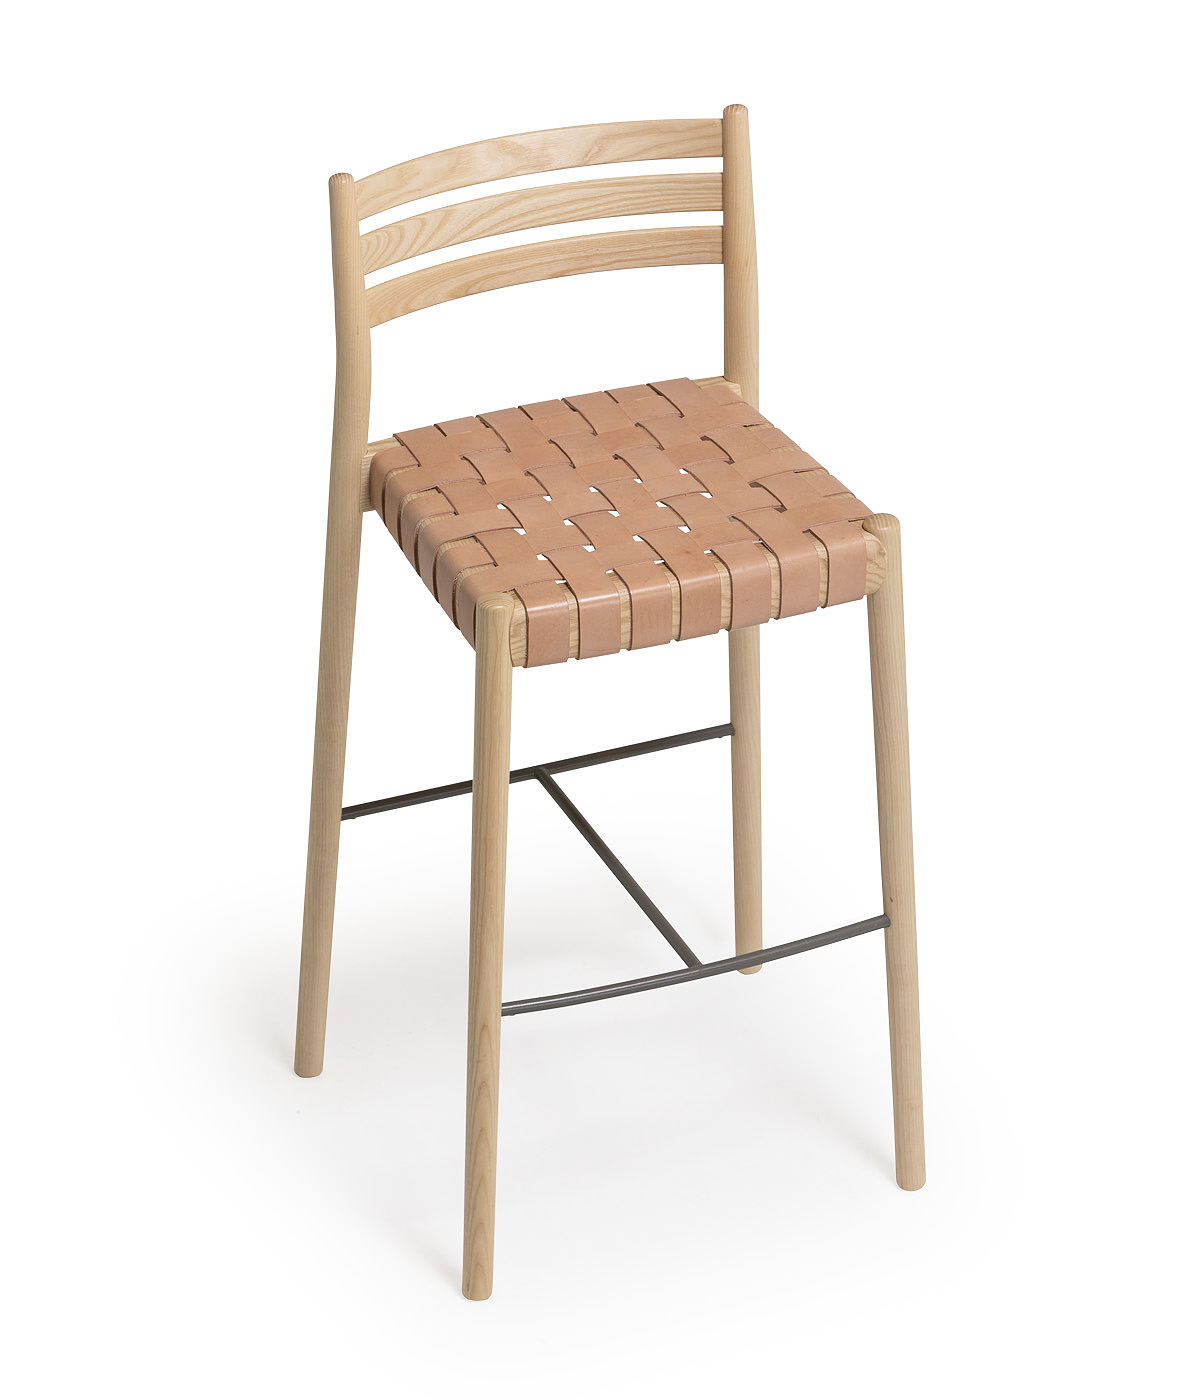 Bogart Stool with backrest and woven cord seat - Vergés